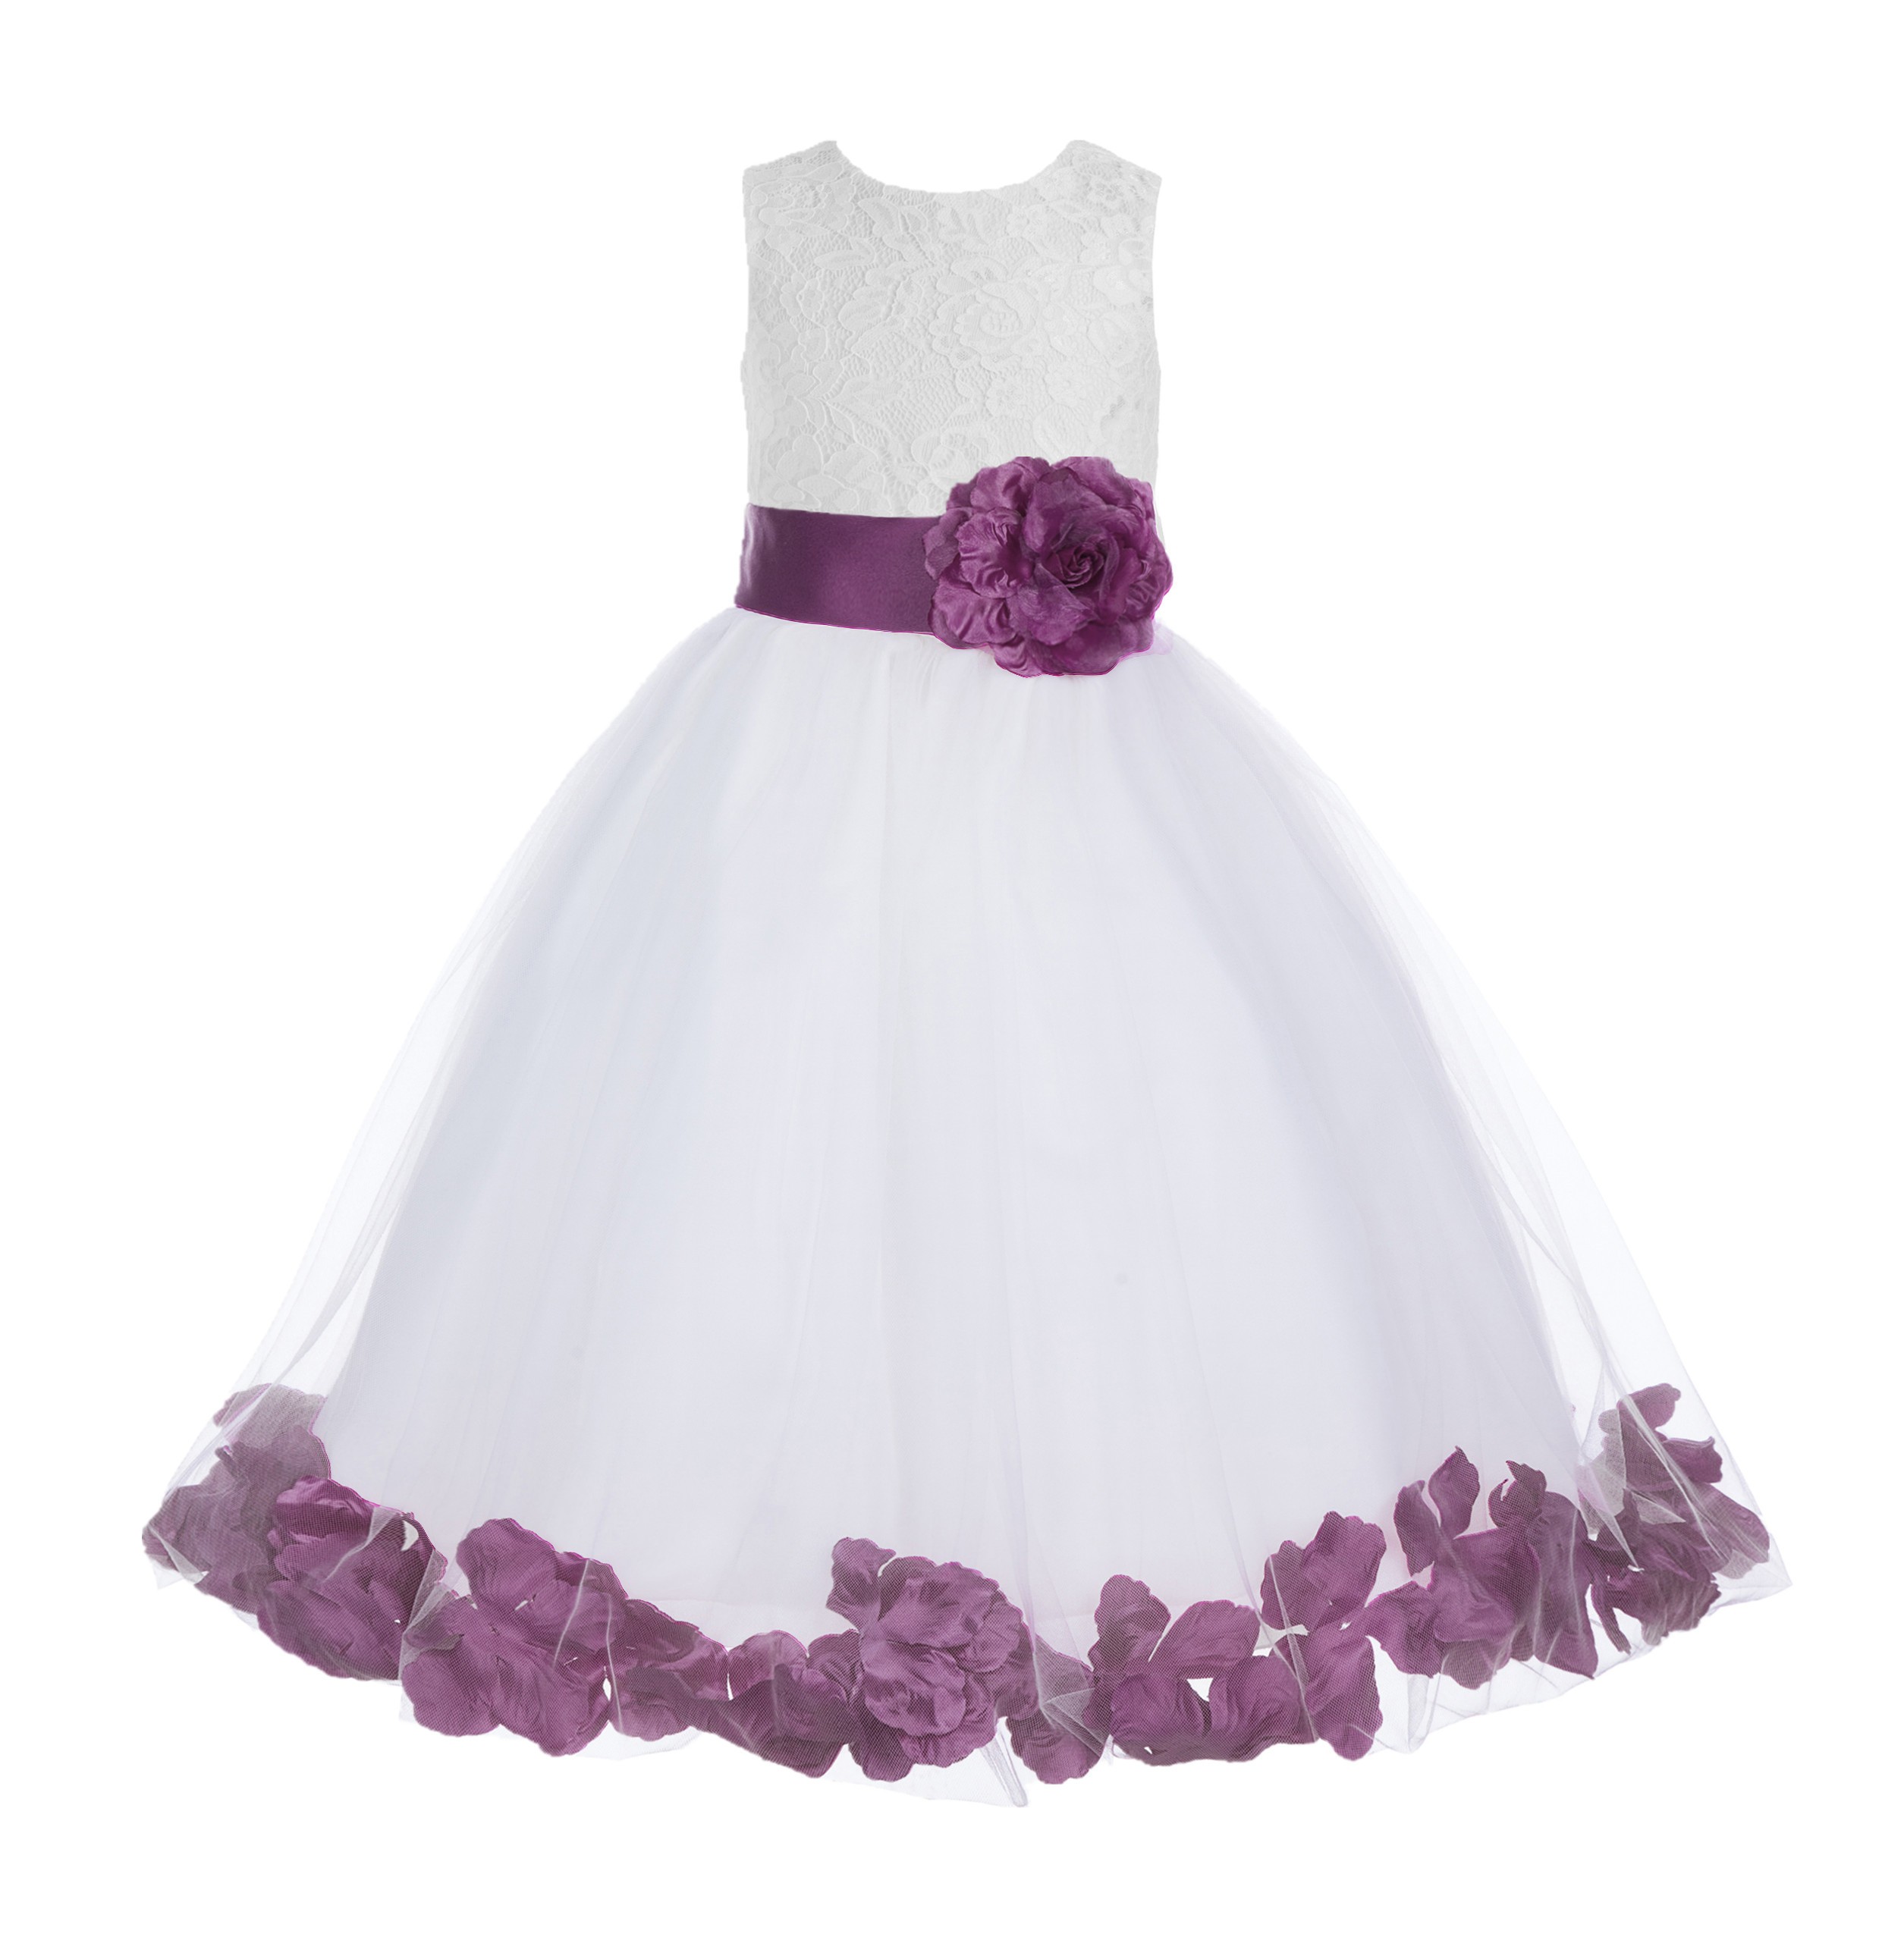 Ivory / Wisteria Floral Lace Heart Cutout Flower Girl Dress with Petals 185T